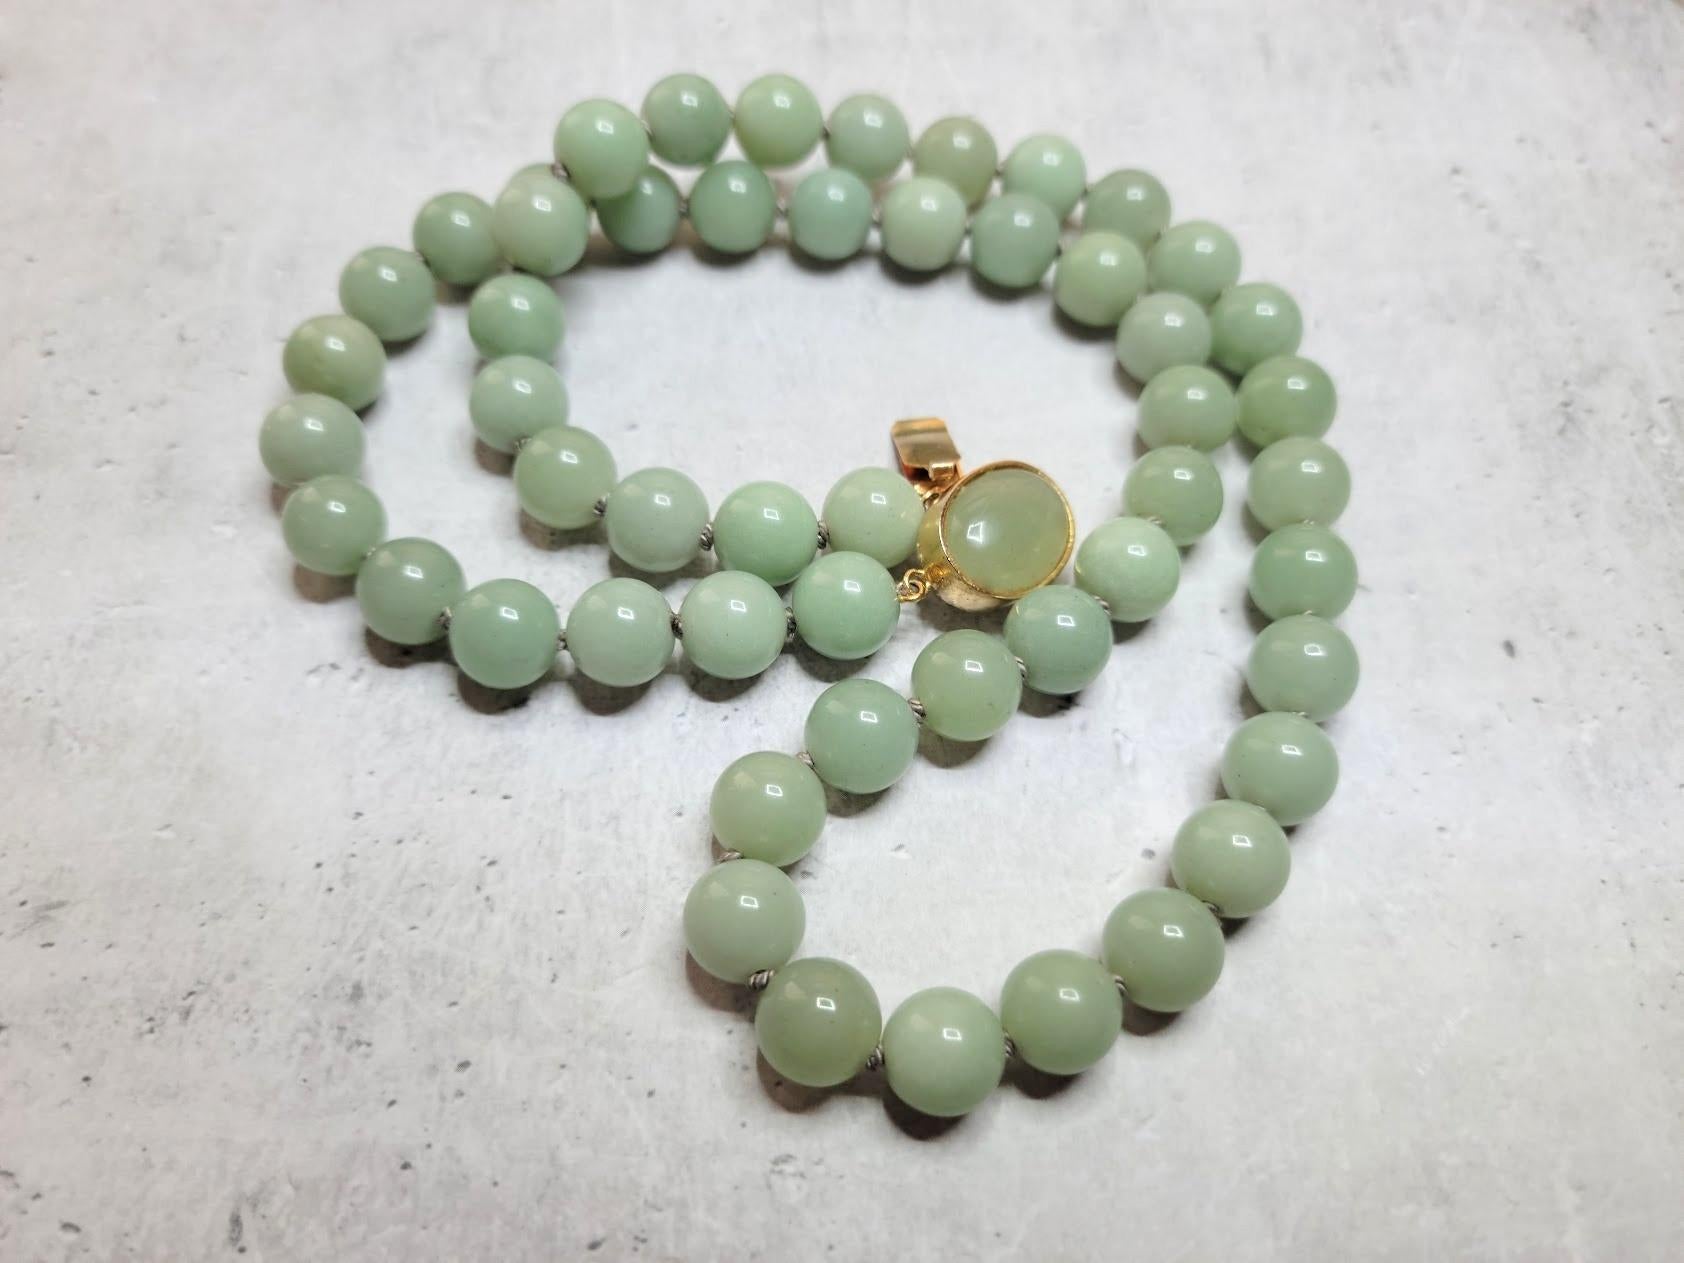 New Zealand Green Inanga Nephrite Necklace For Sale 3